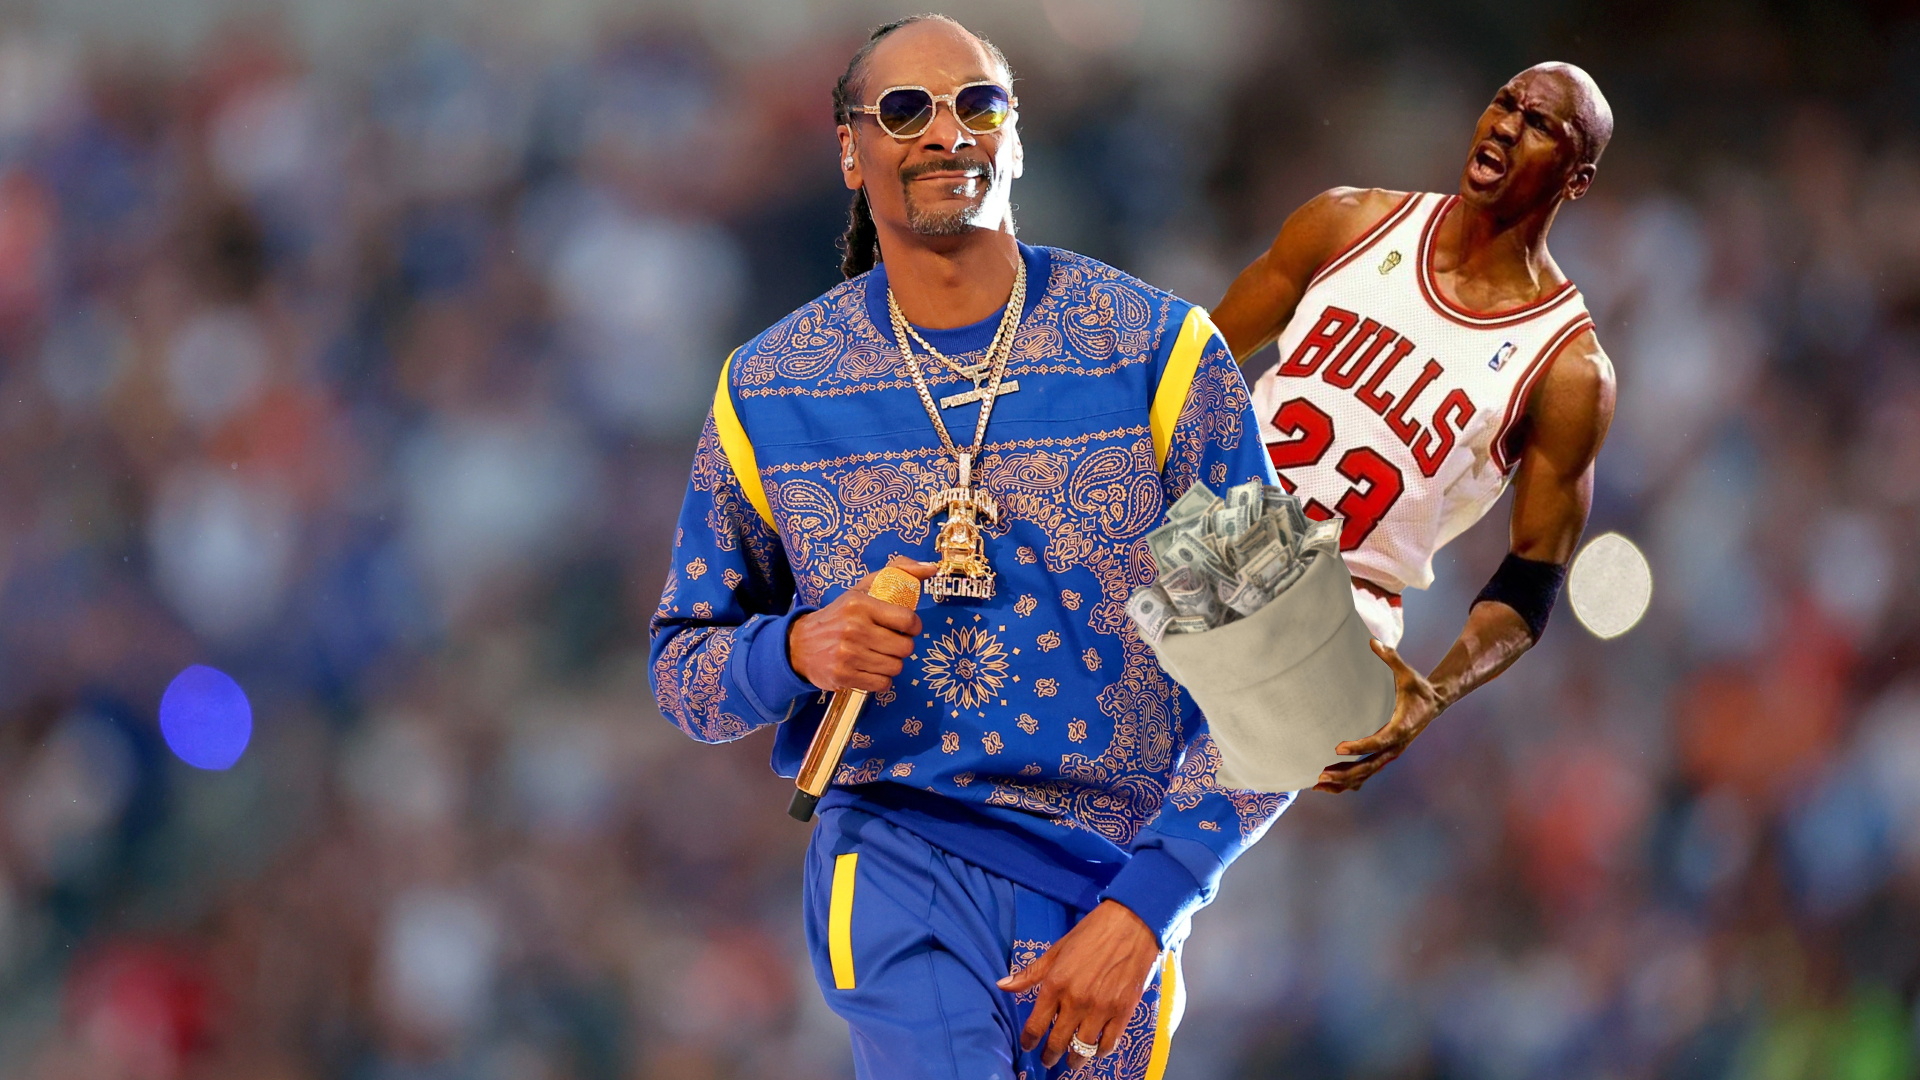 Athletes Of America: Stop Giving Snoop Dogg Your Jerseys